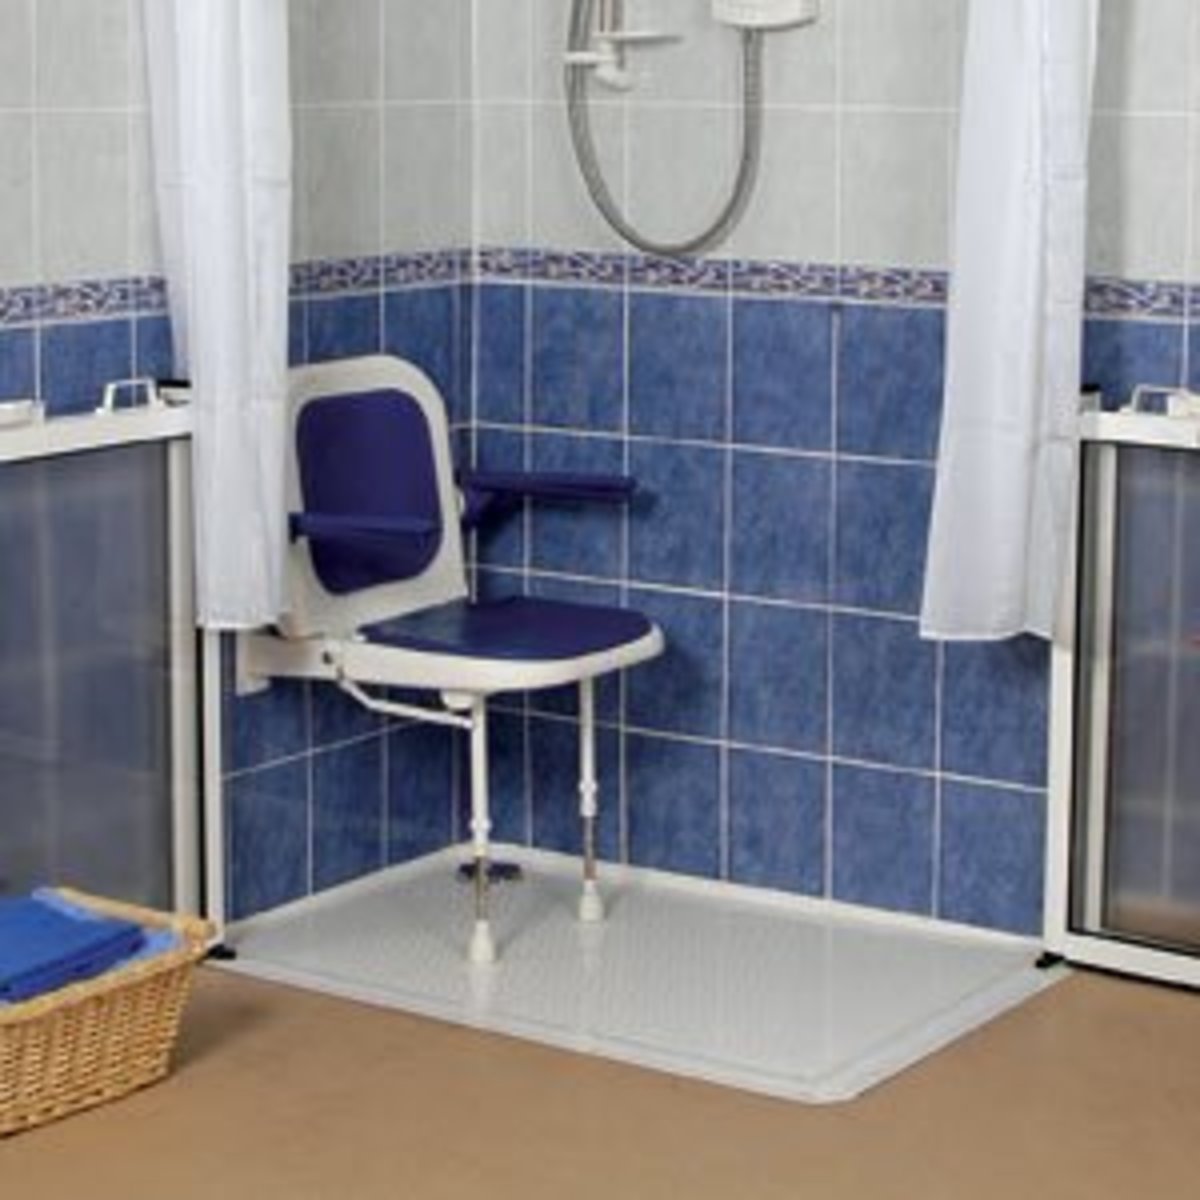 DIY Handicapped Showers Tips